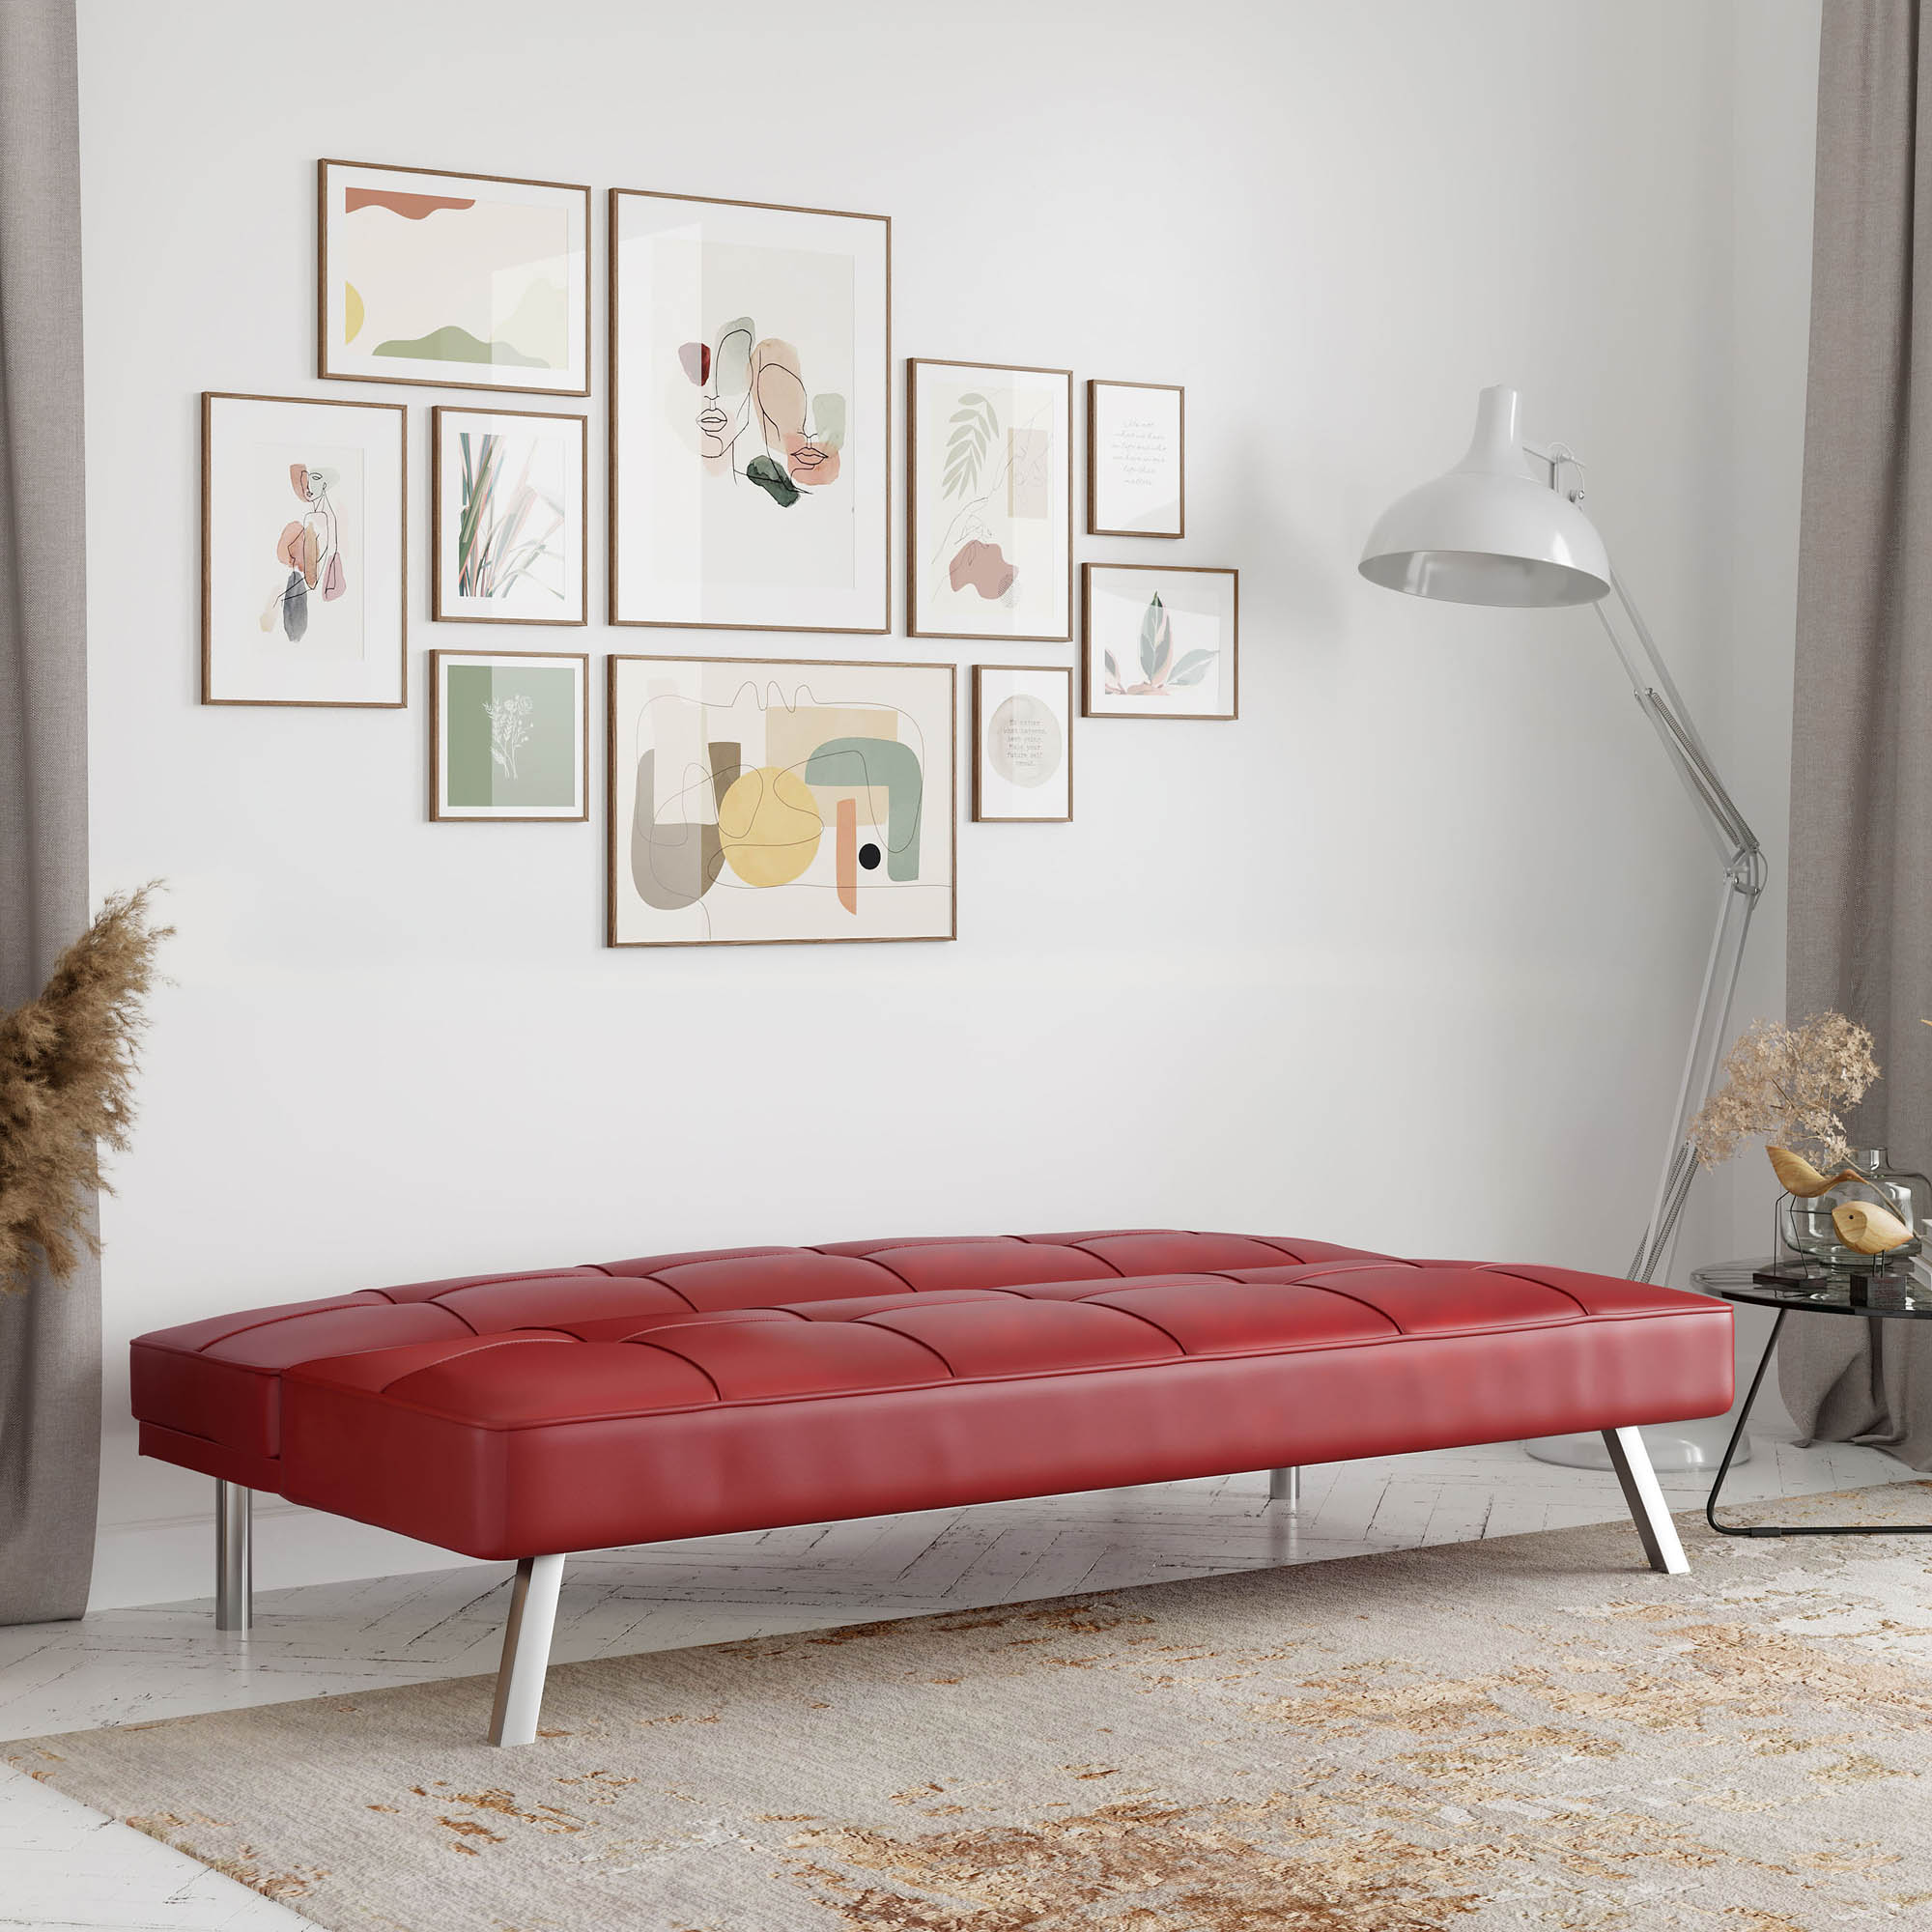 Serta Chelsea Modern Futon, Red Faux Leather - image 3 of 12